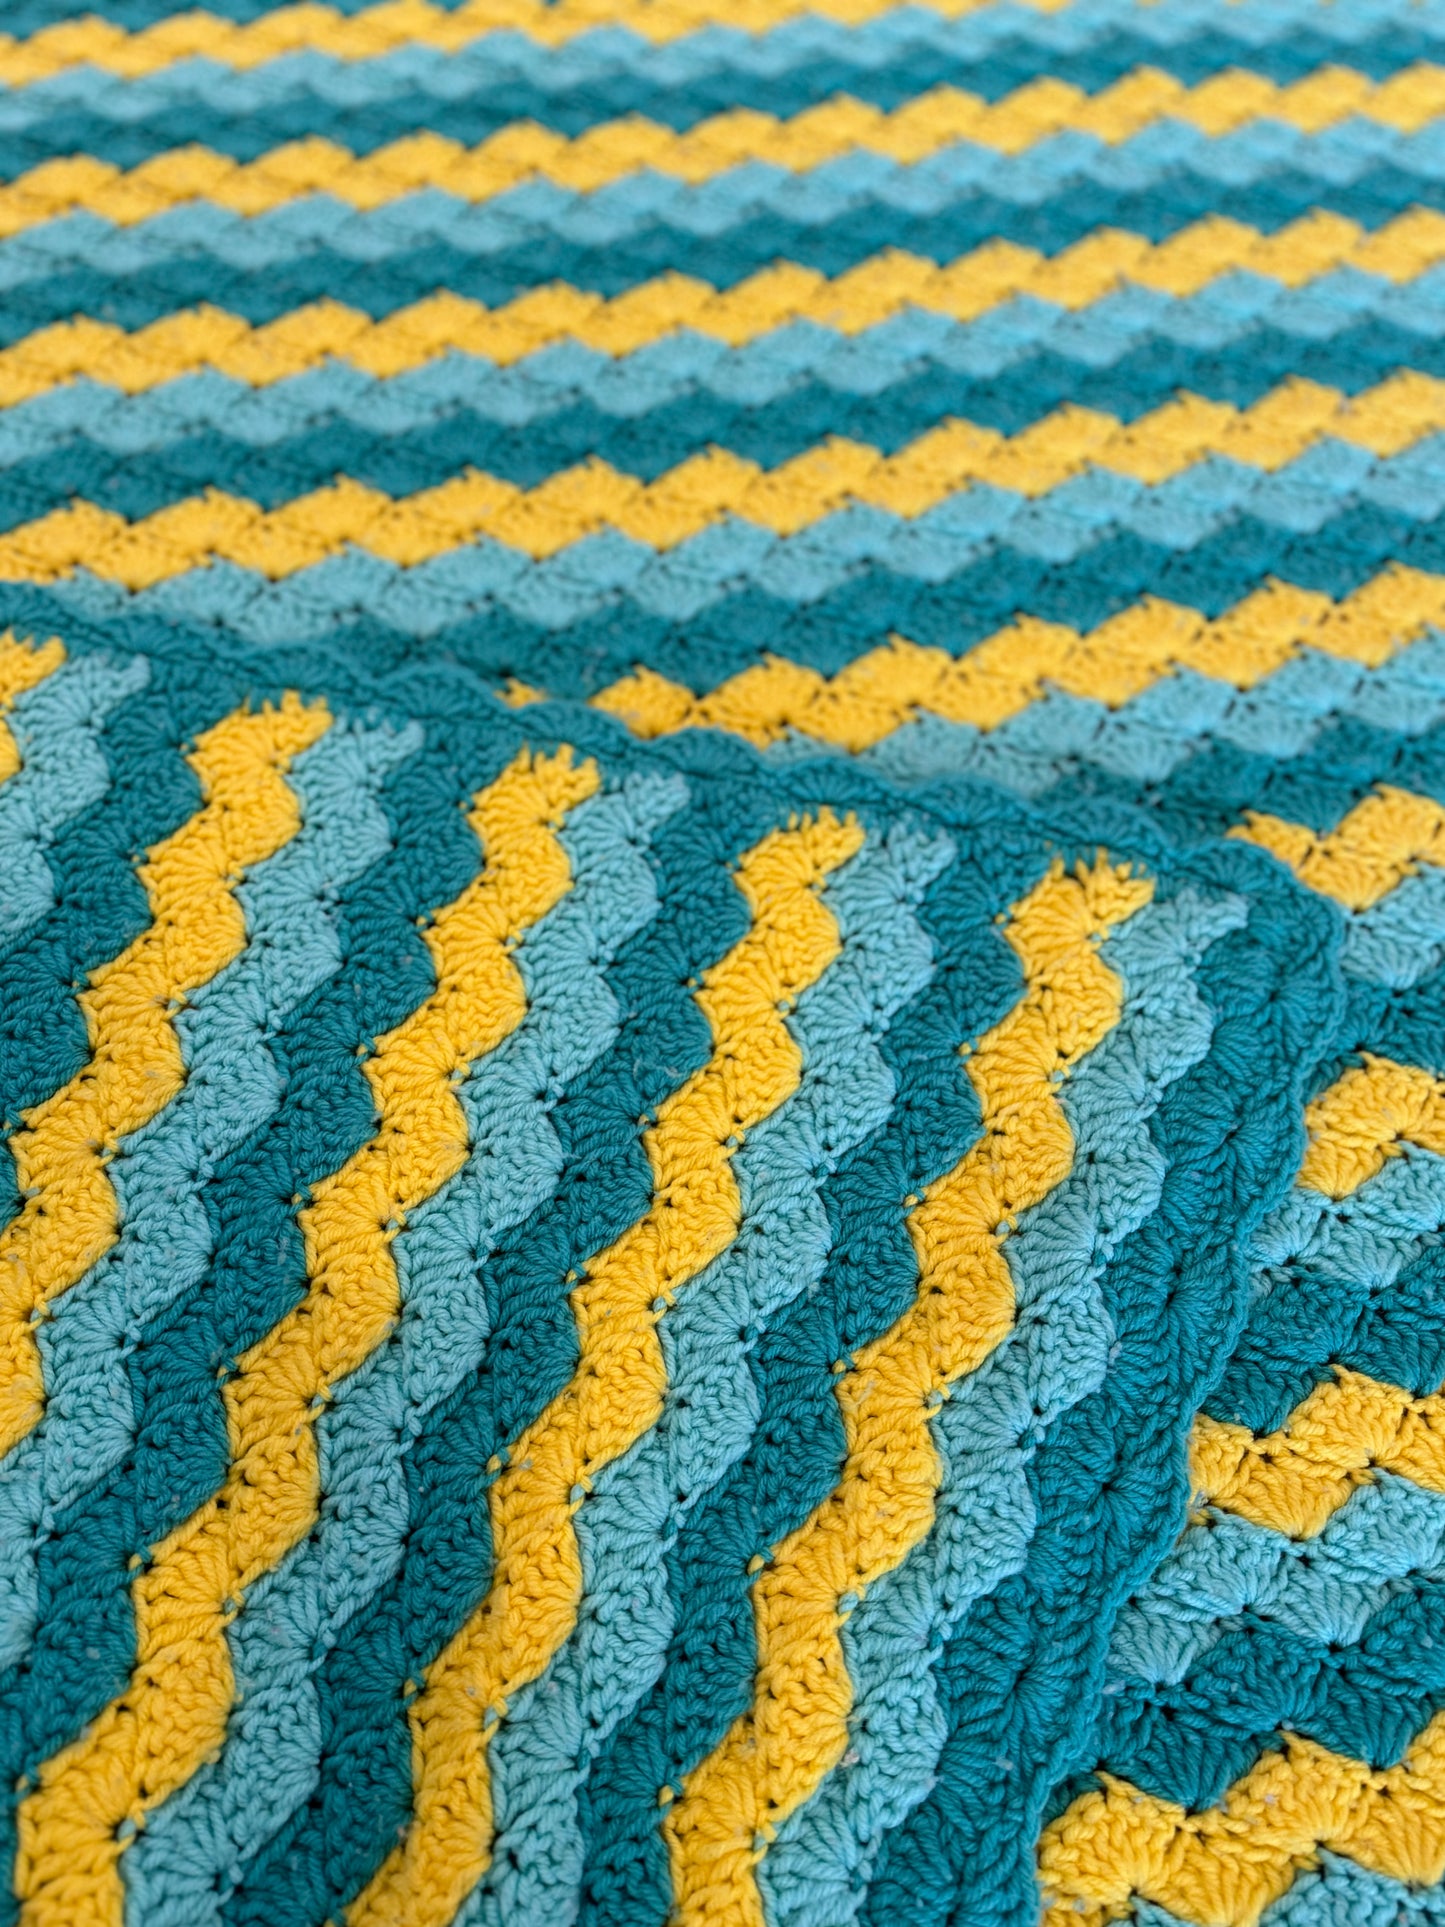 Teal, Mint & Yellow Afghan 83”x60”